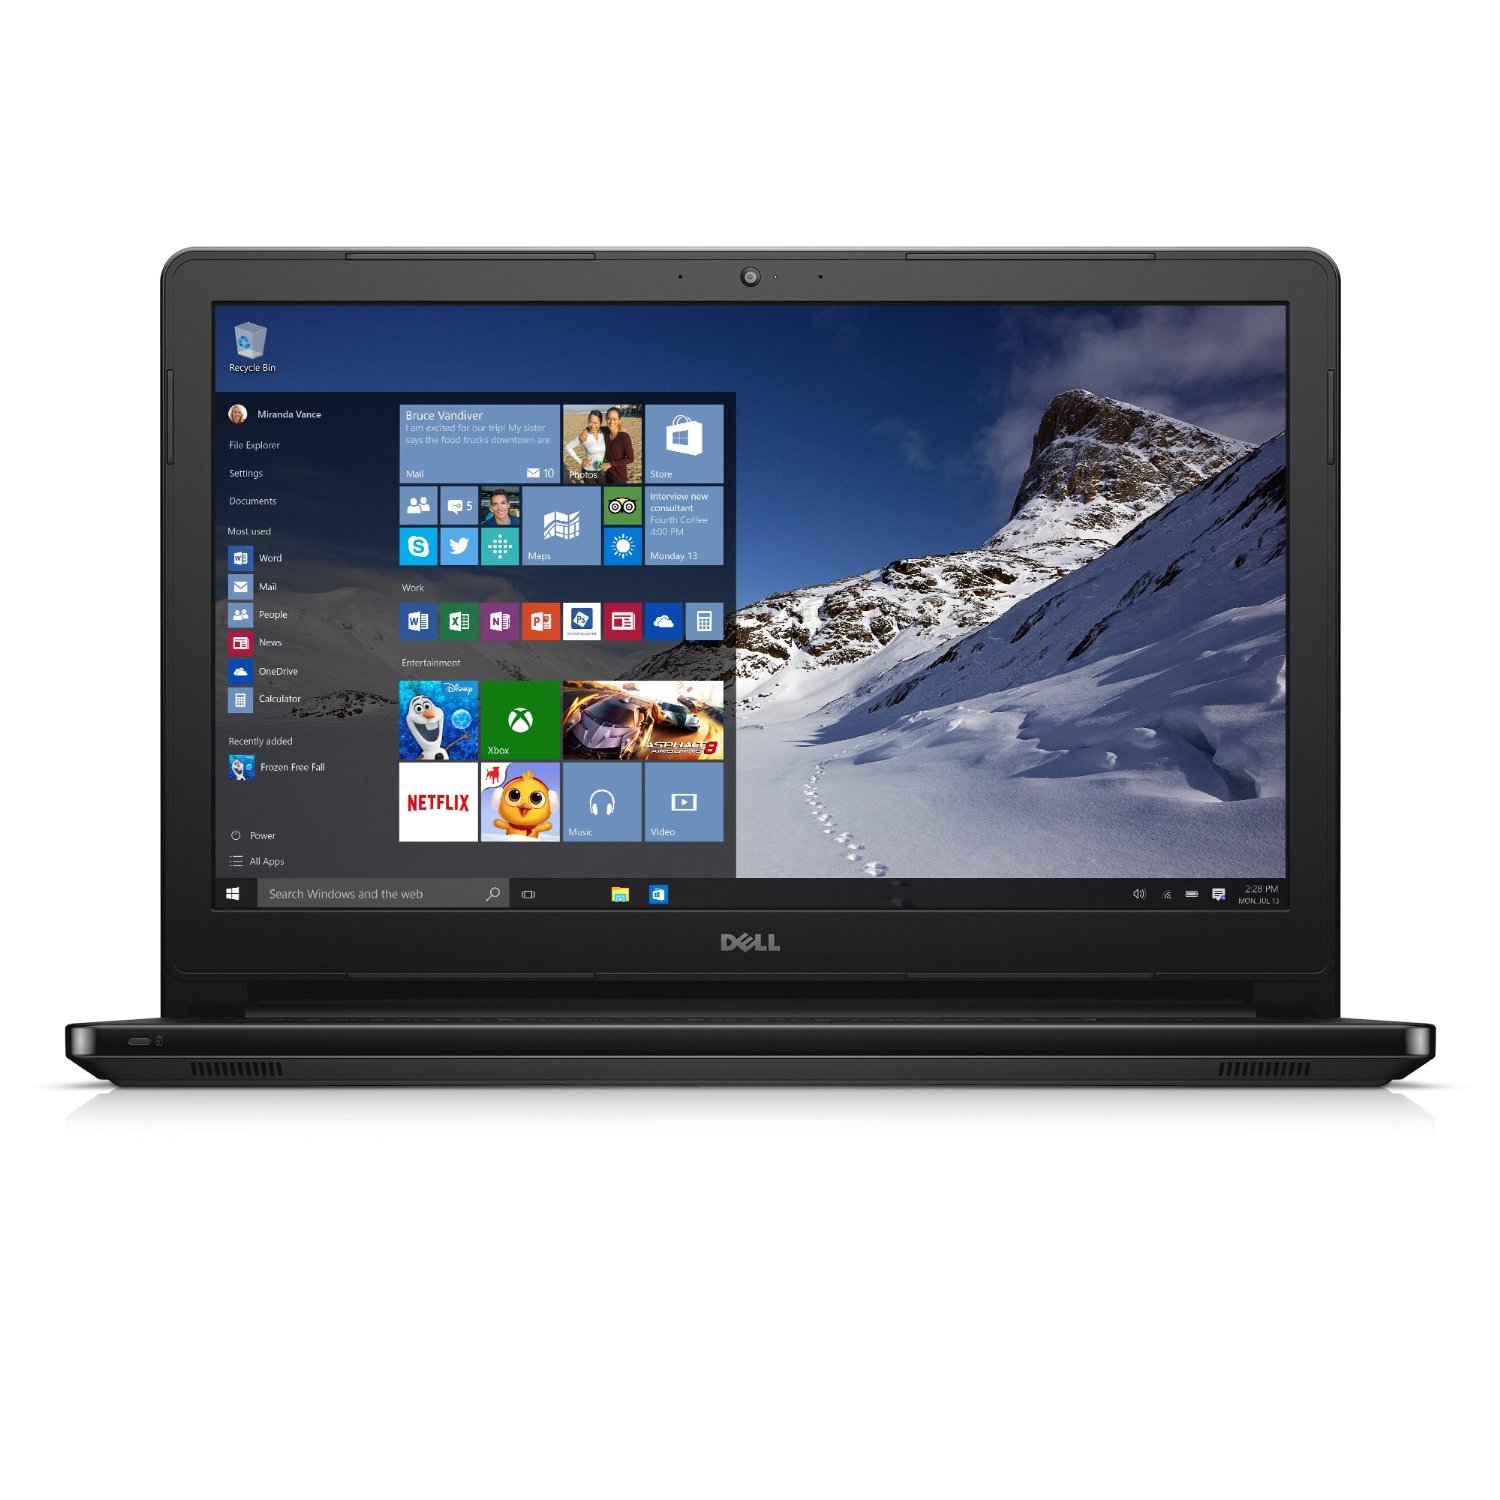 Dell Inspiron i5558-2859BLK 15.6 Inch Touchscreen Laptop